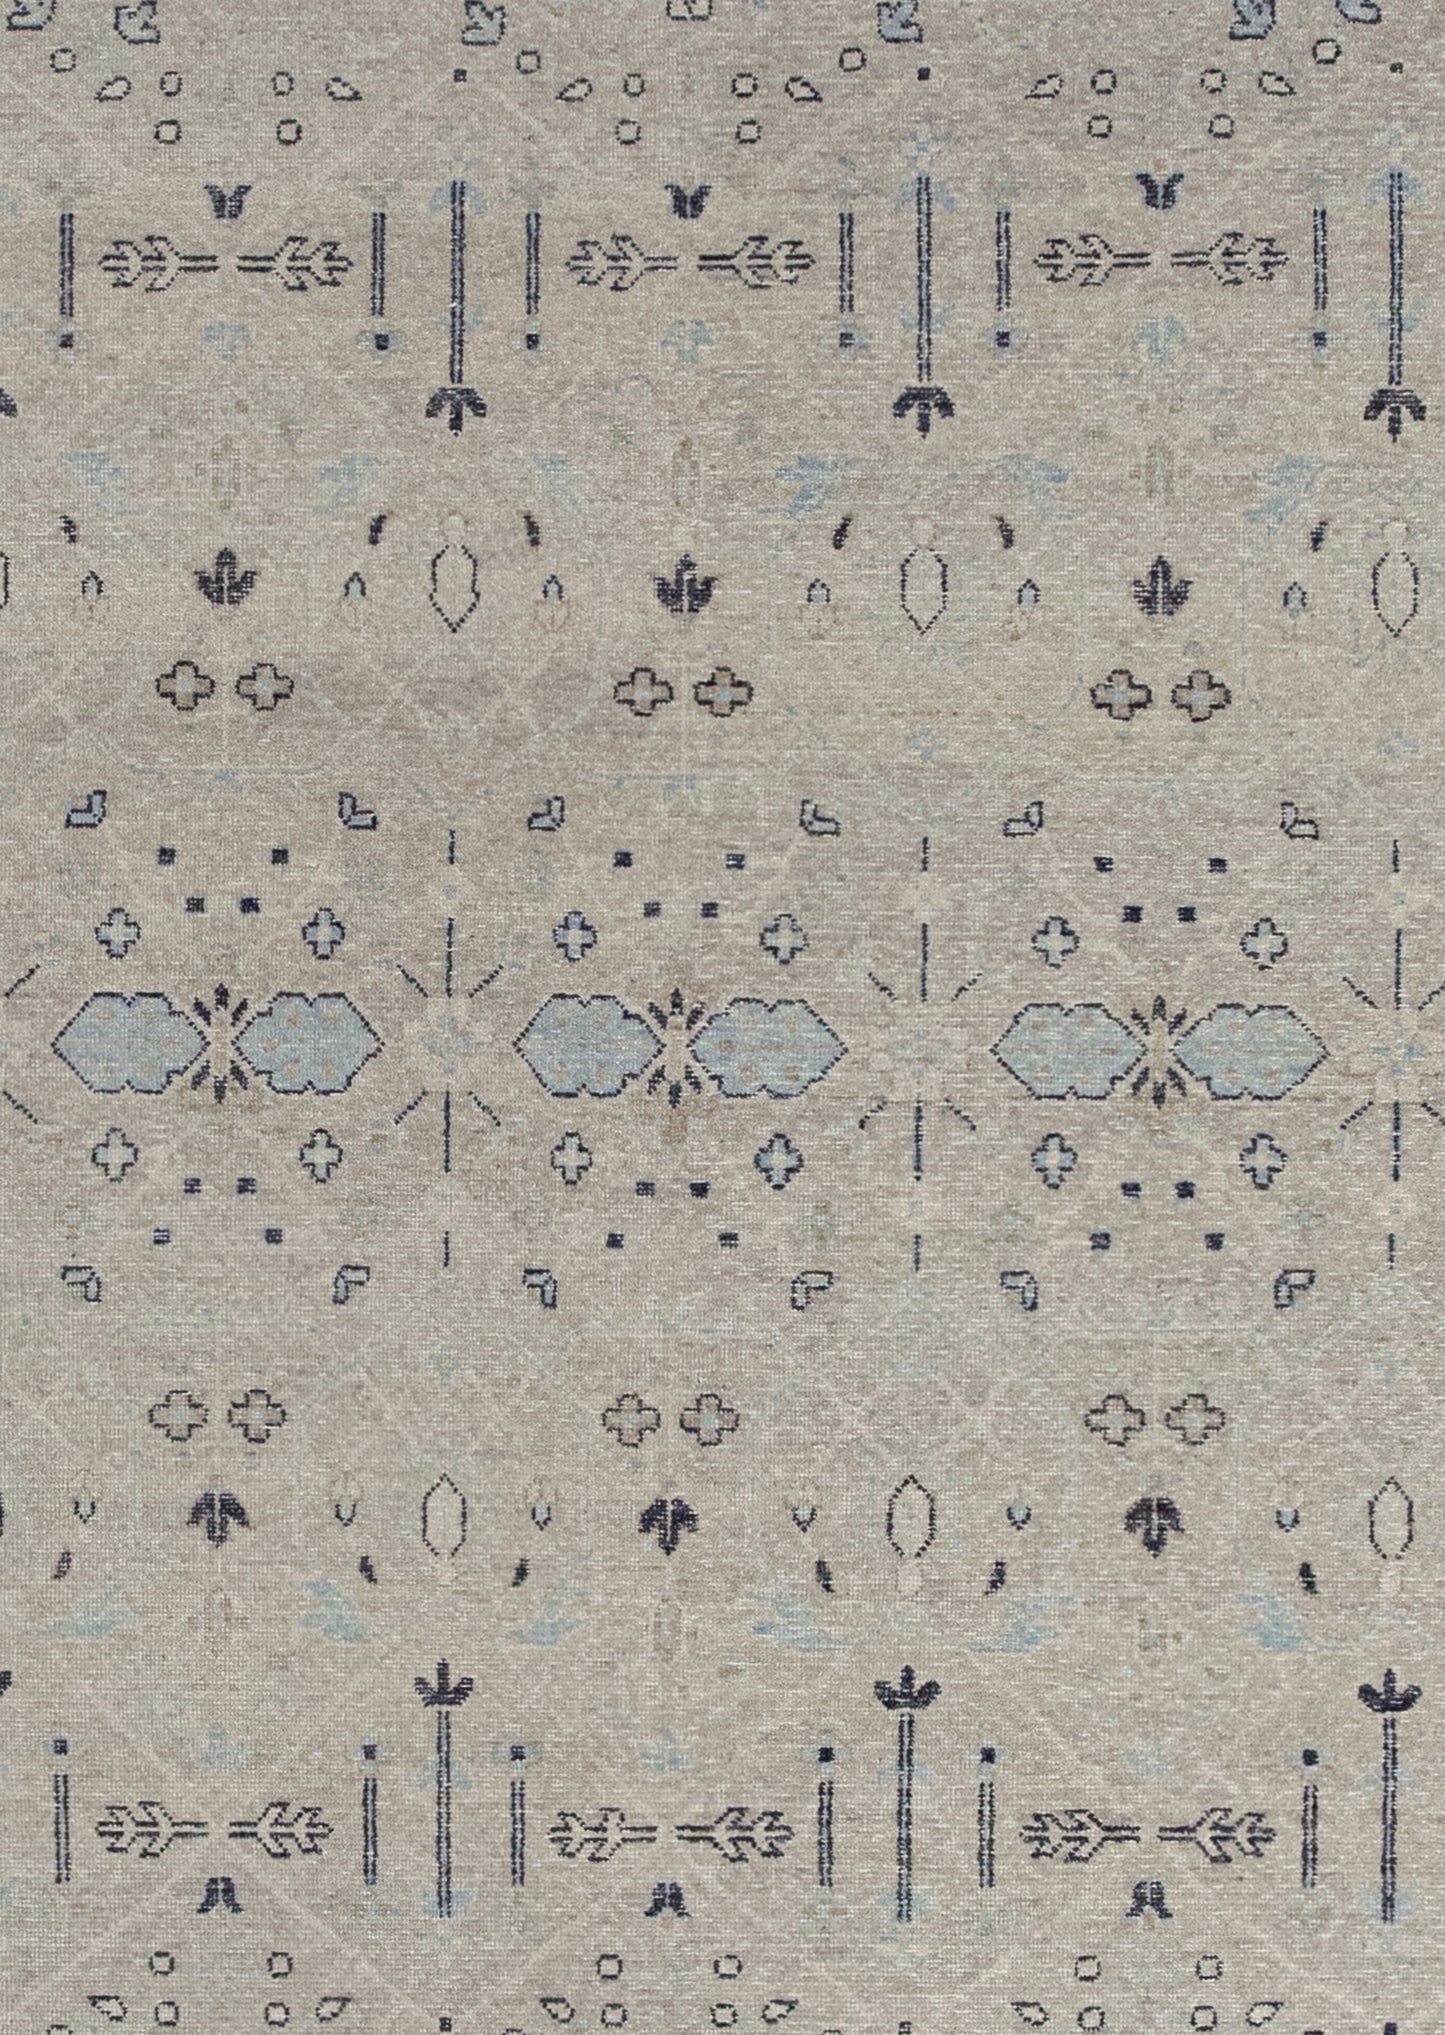 The rug's background is beige with the black outlined composition and blue details on top.